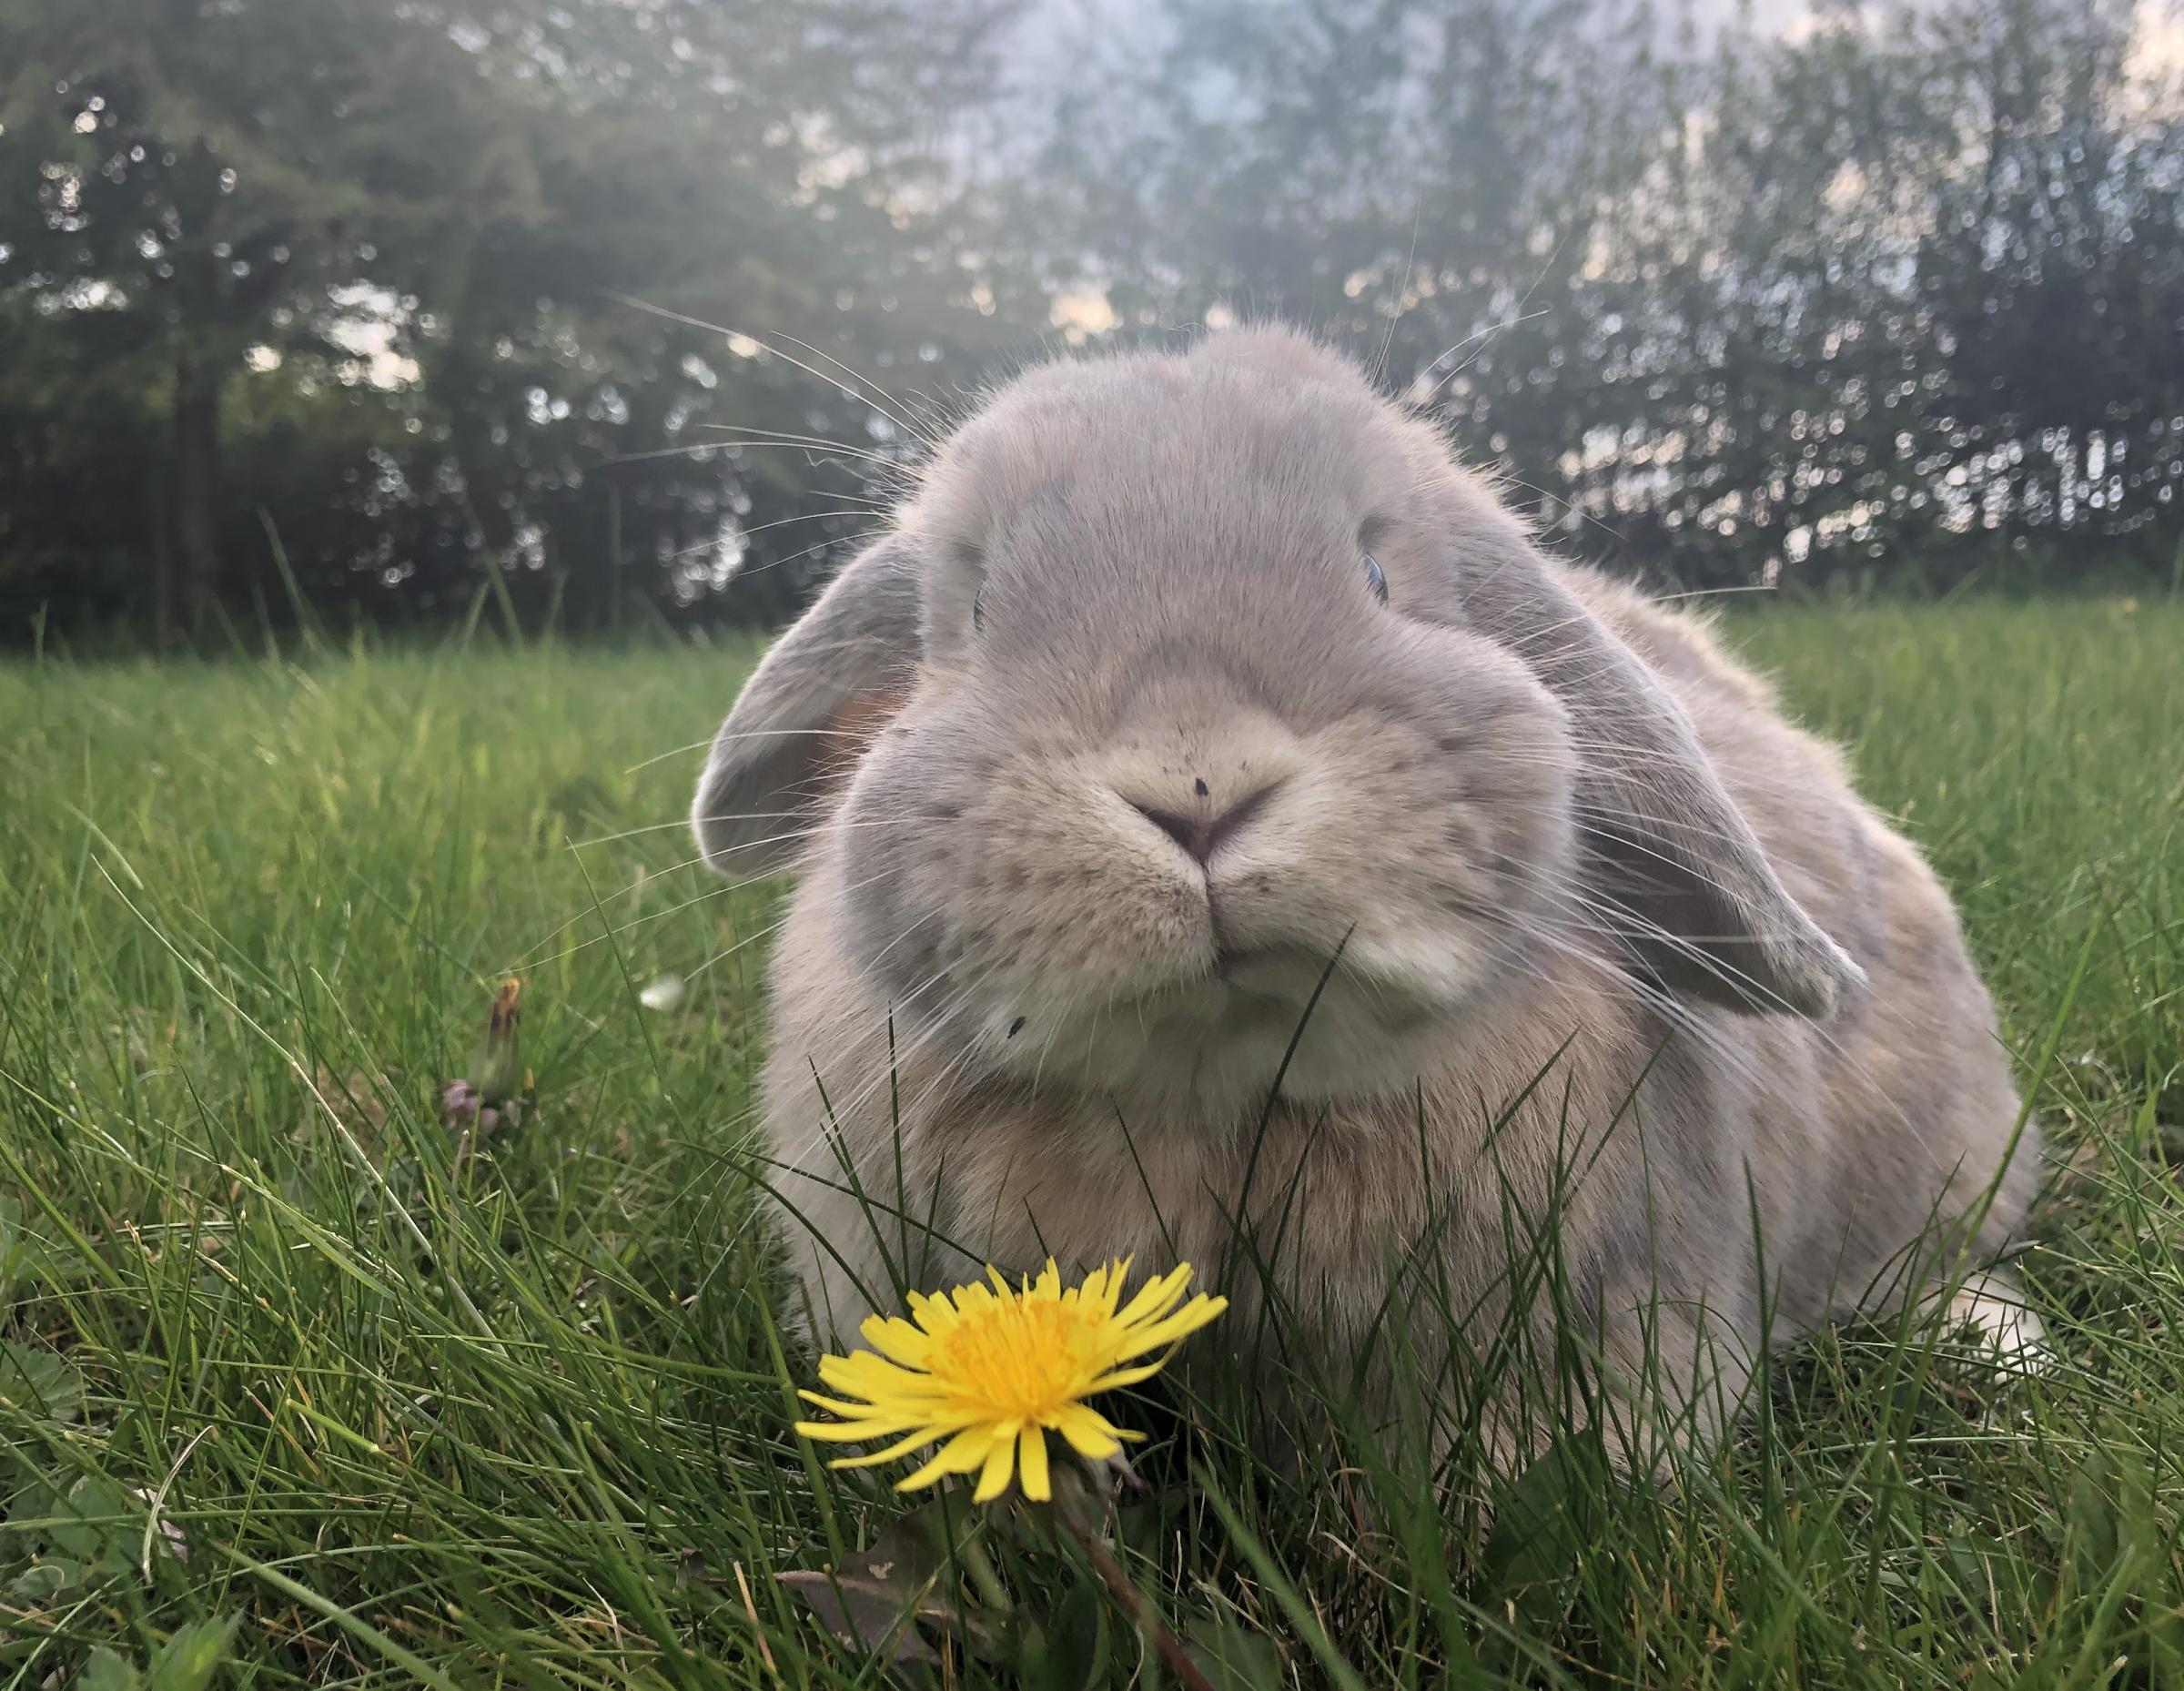 Hereford Times: “One more dandelion then it’s time to settle down to the Hereford Times...”